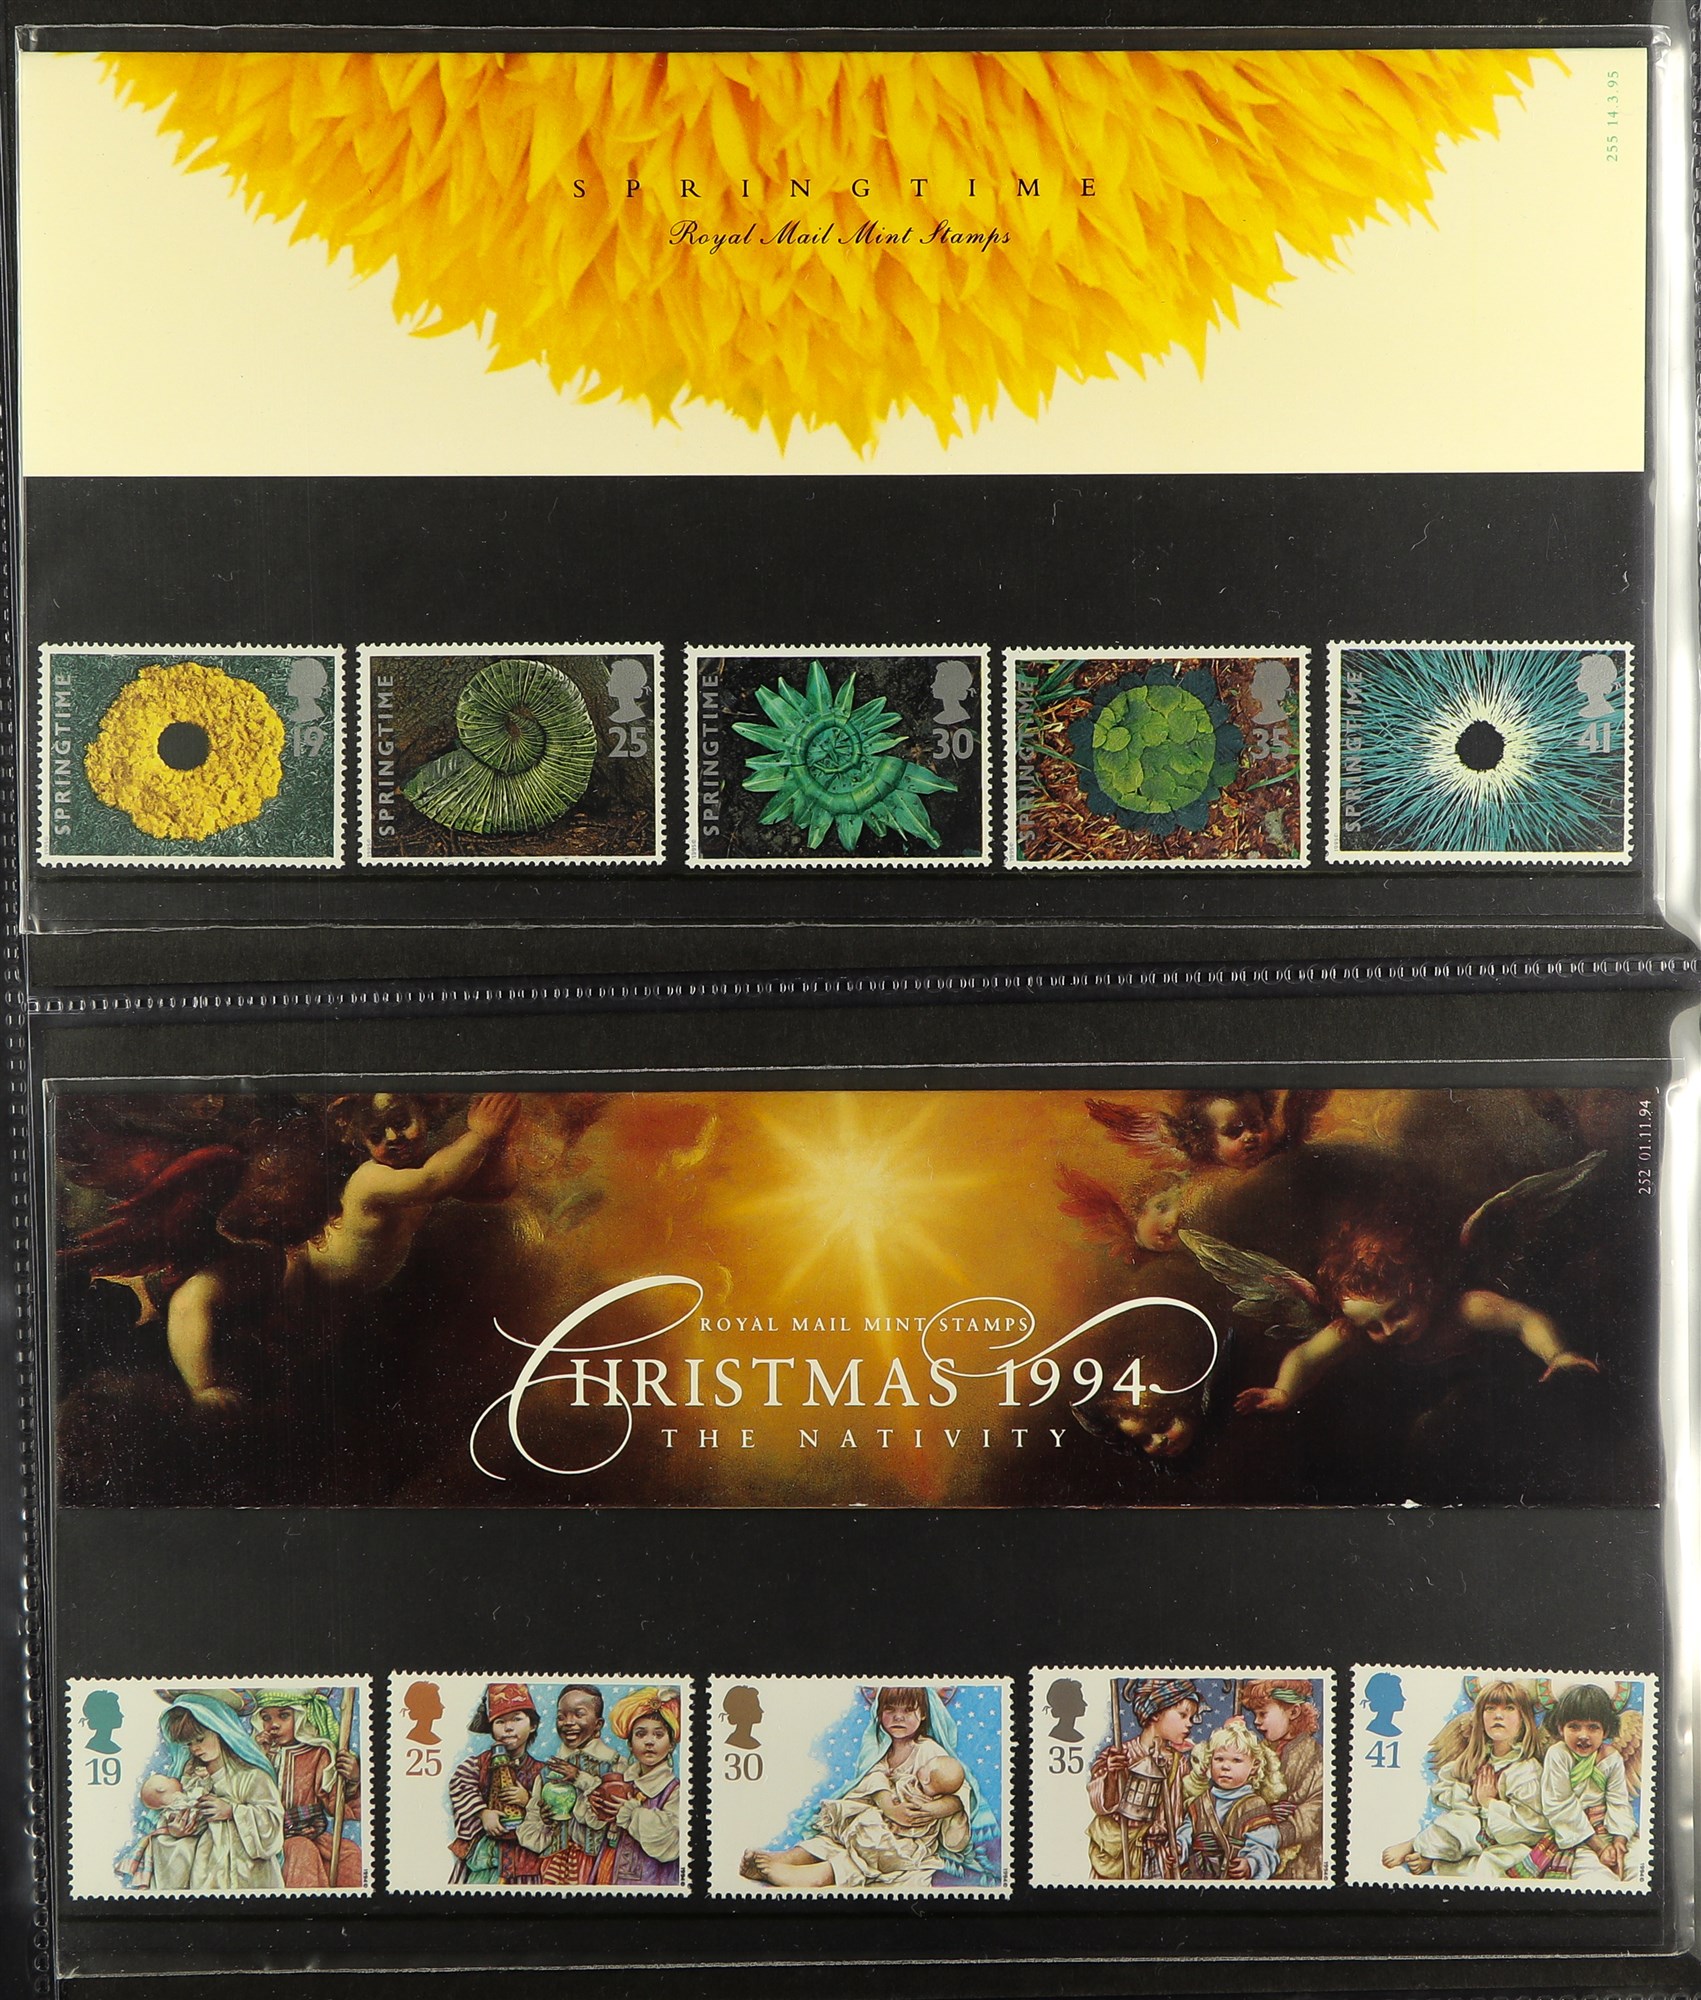 GREAT BRITAIN MOSTLY GREAT BRITAIN including 1970's-2000 presentation packs in albums, large blocks, - Image 12 of 25